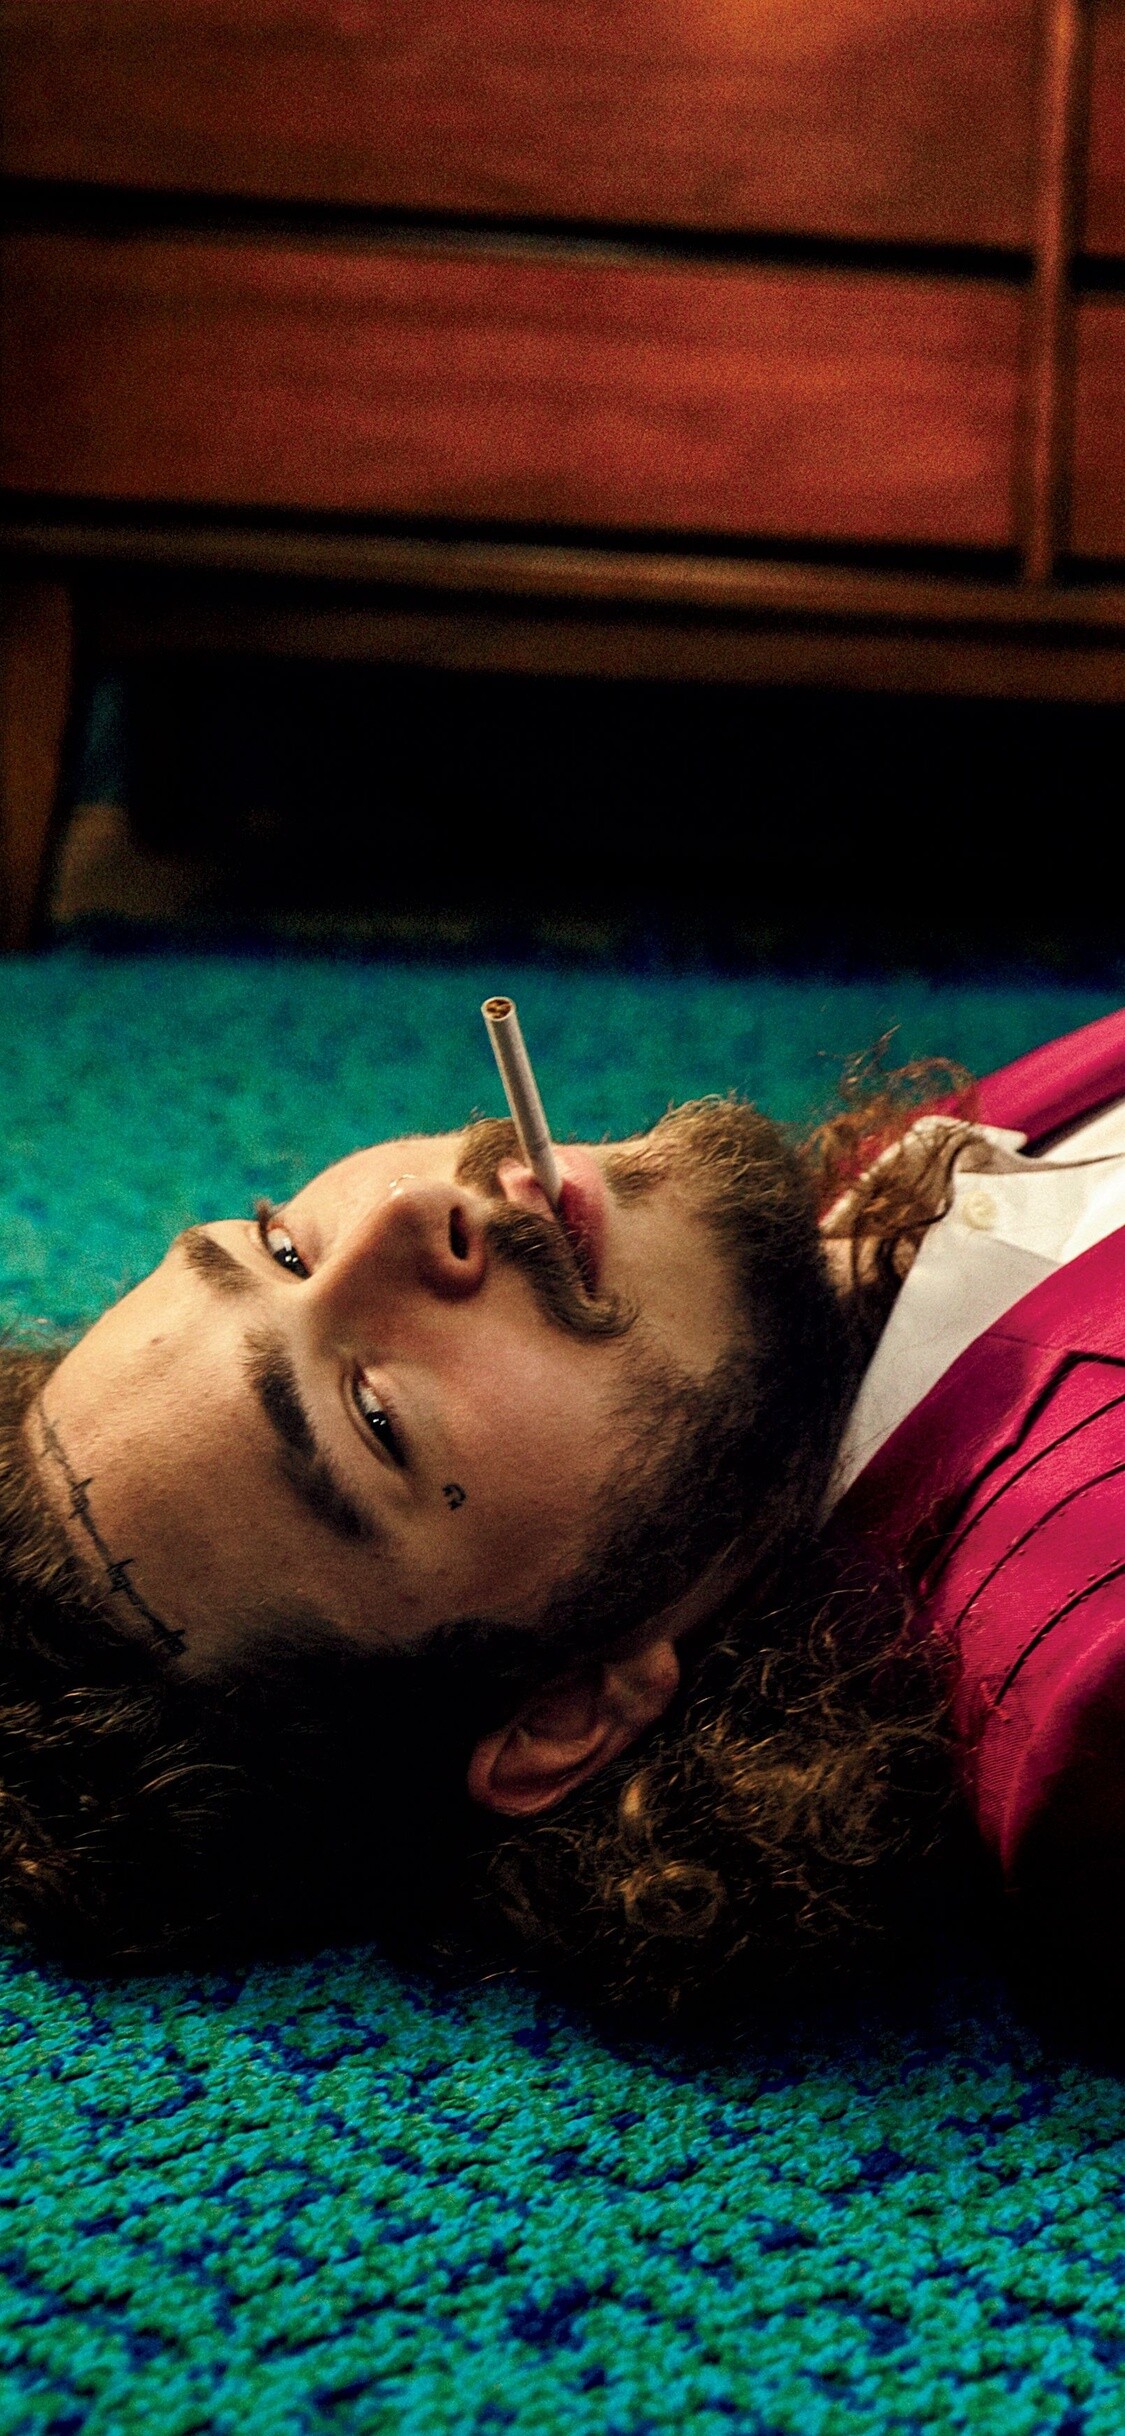 Post Malone: Beerbongs and Bentleys broke the record for the most simultaneous top 20 entries on the Billboard Hot 100. 1130x2440 HD Wallpaper.